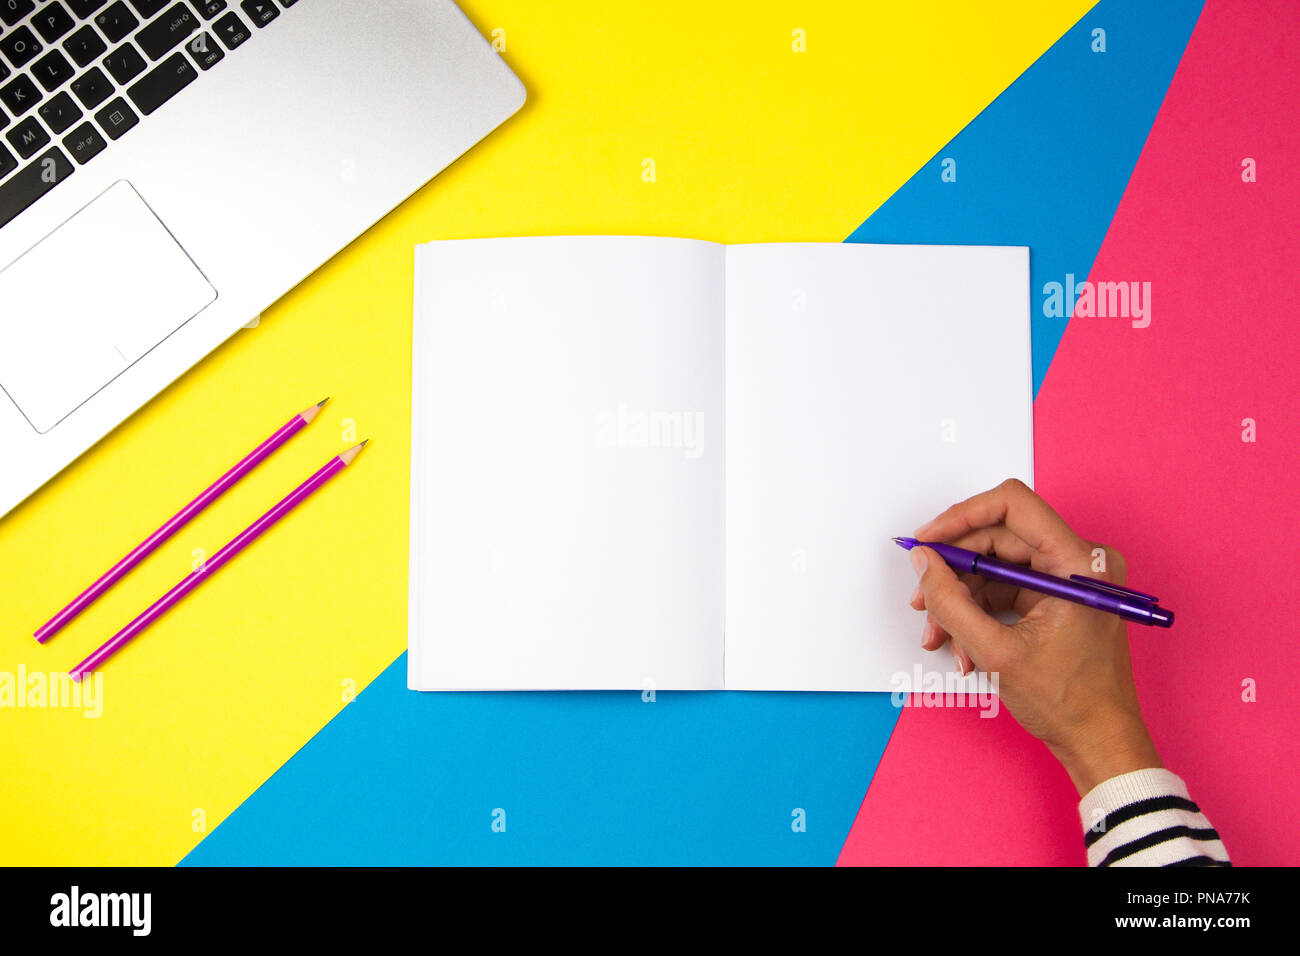 Woman hand writing in notebook on colorful background Stock Photo